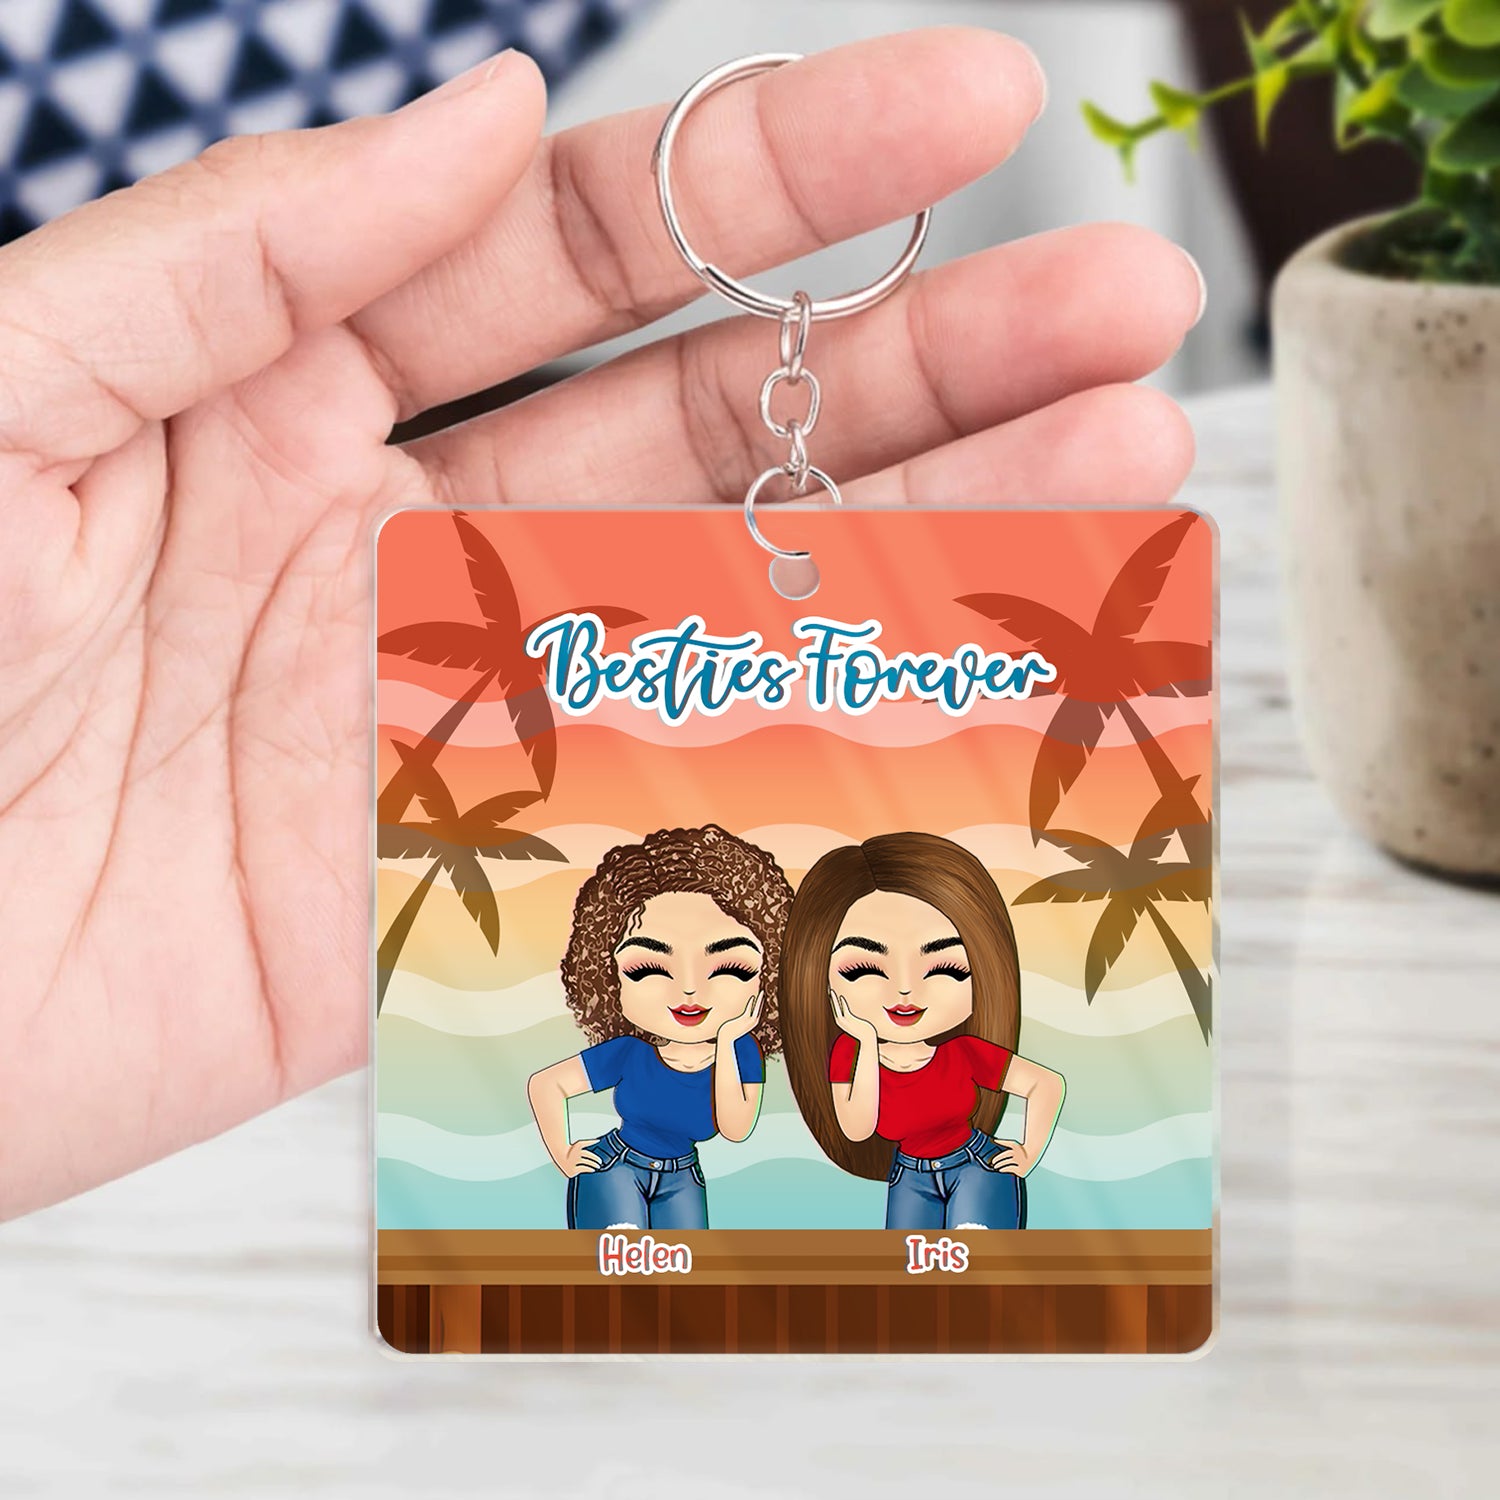 Best Friends Are the Sisters We Choose Keyring, Best Friends